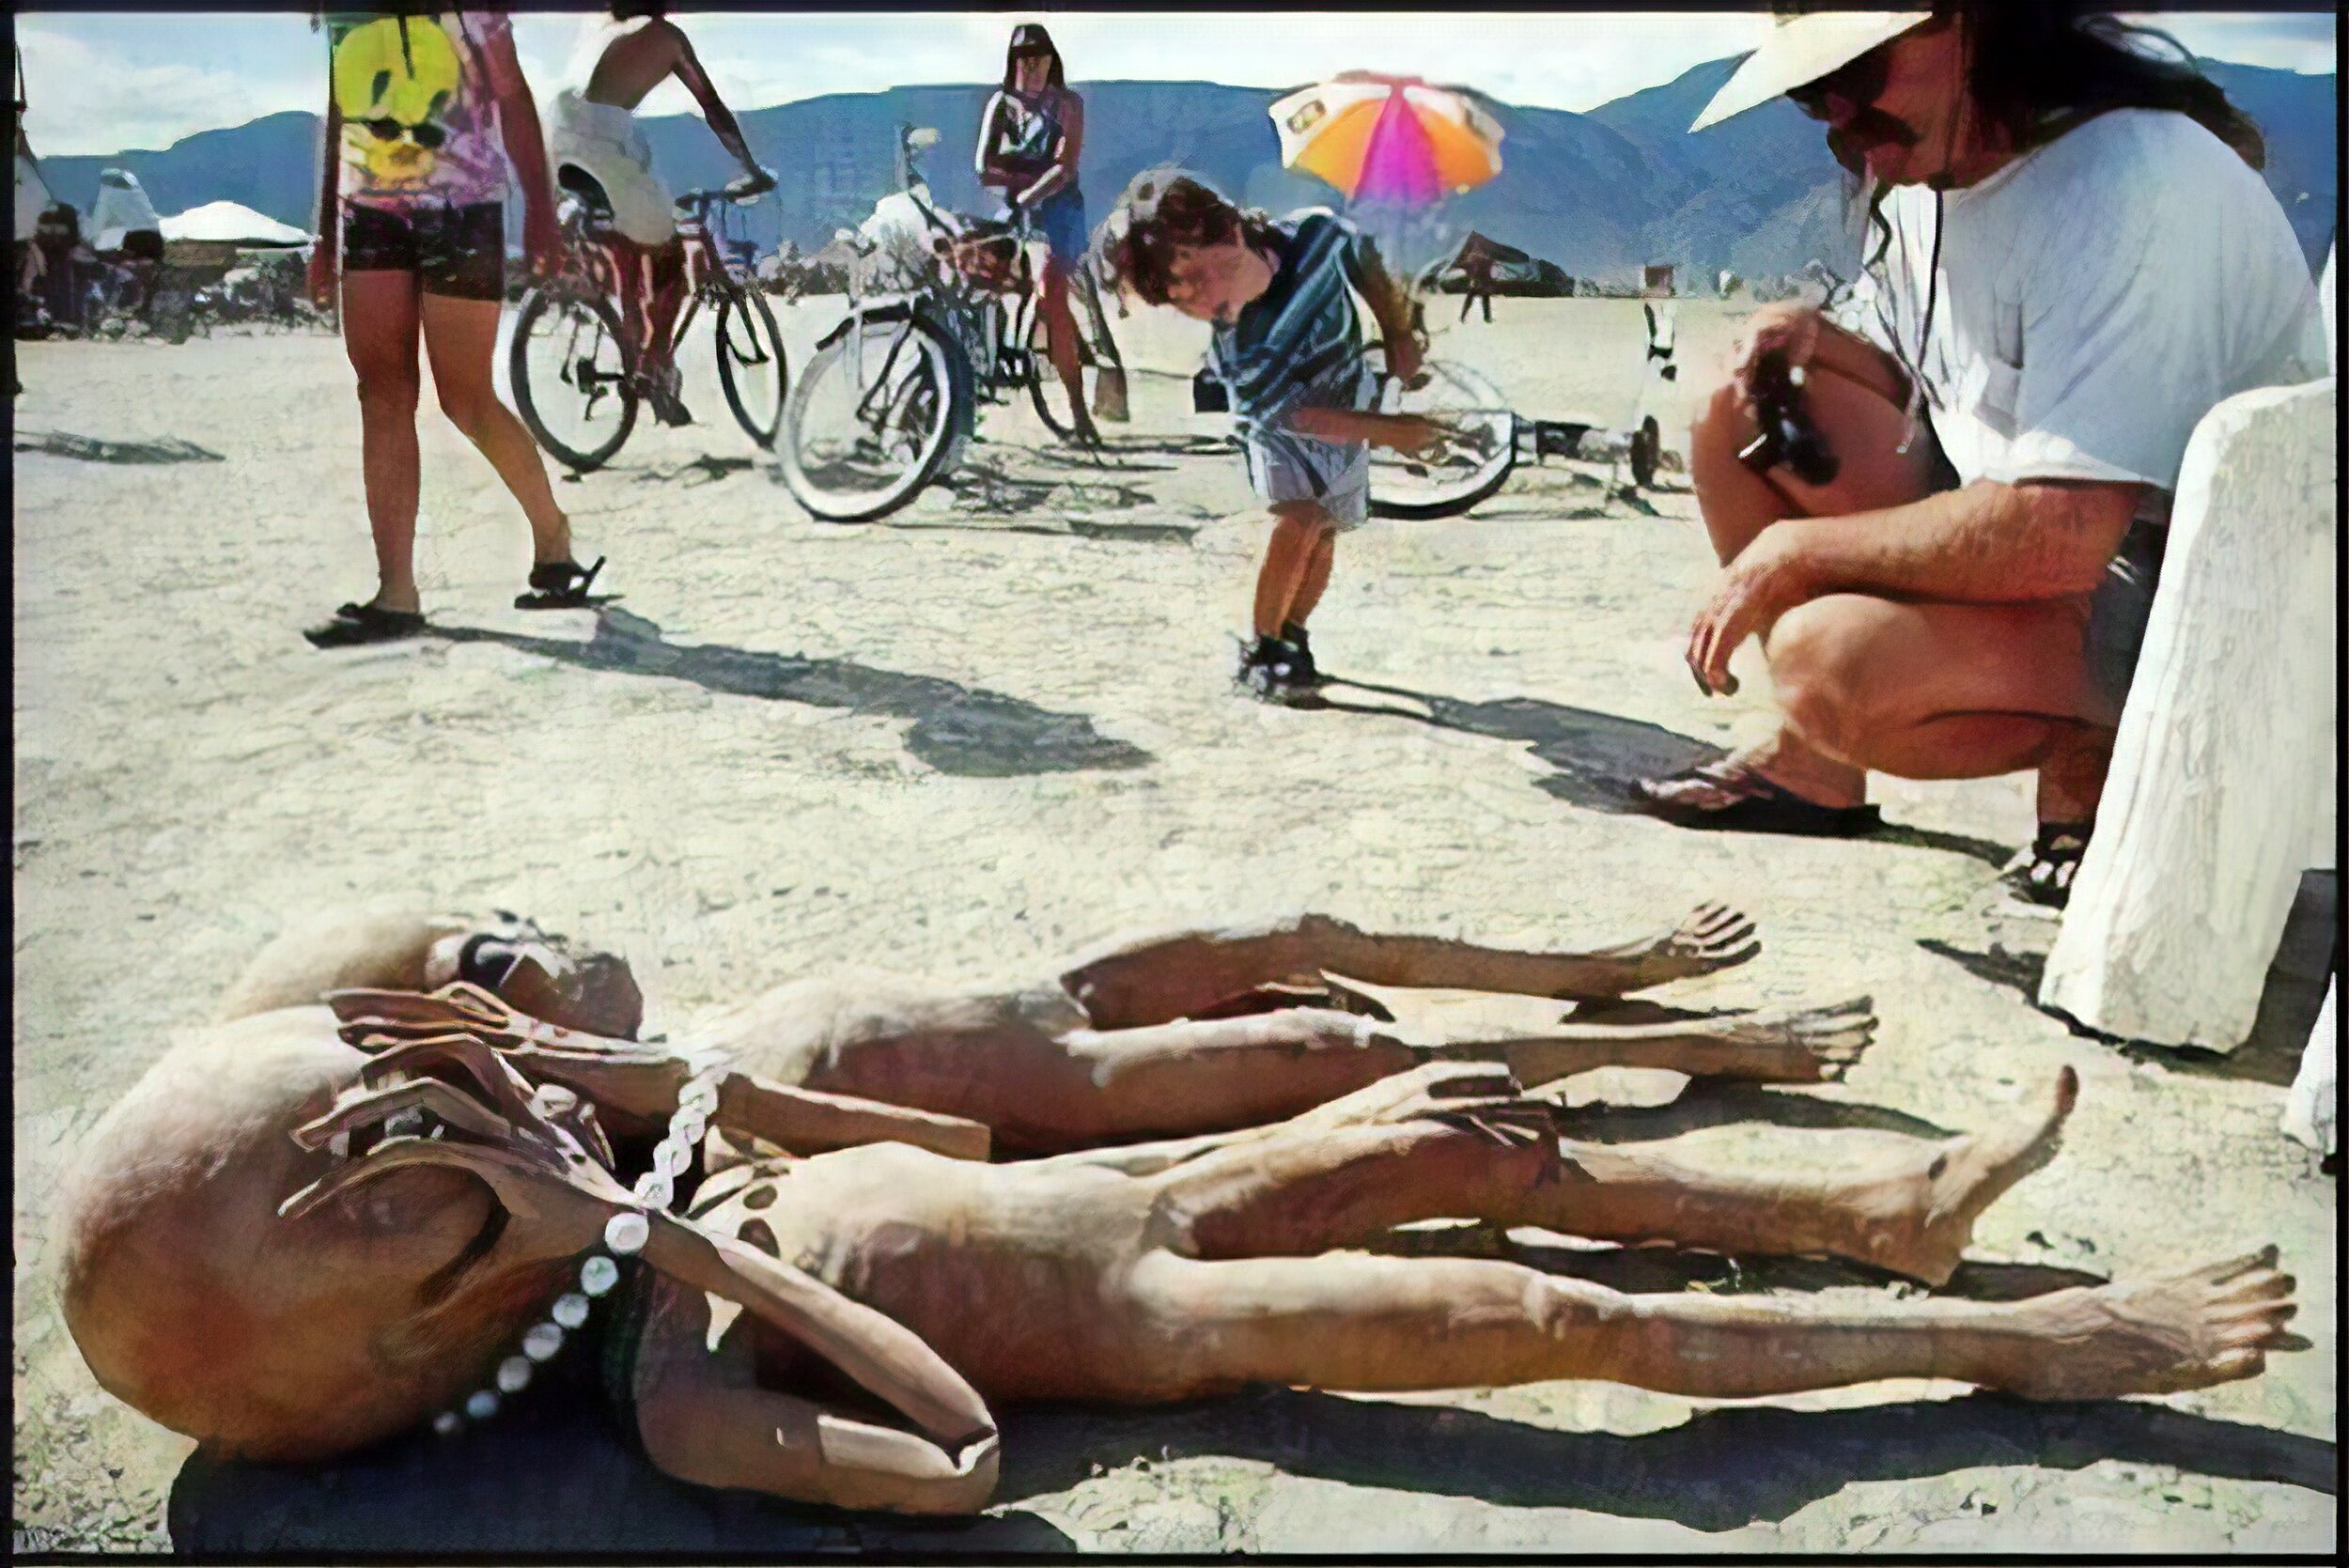 SICK: Crazy art was scattered all over the desert sand of the Black Rock Desert. These two ET-like dolls may have frightened more than they enjoyed.